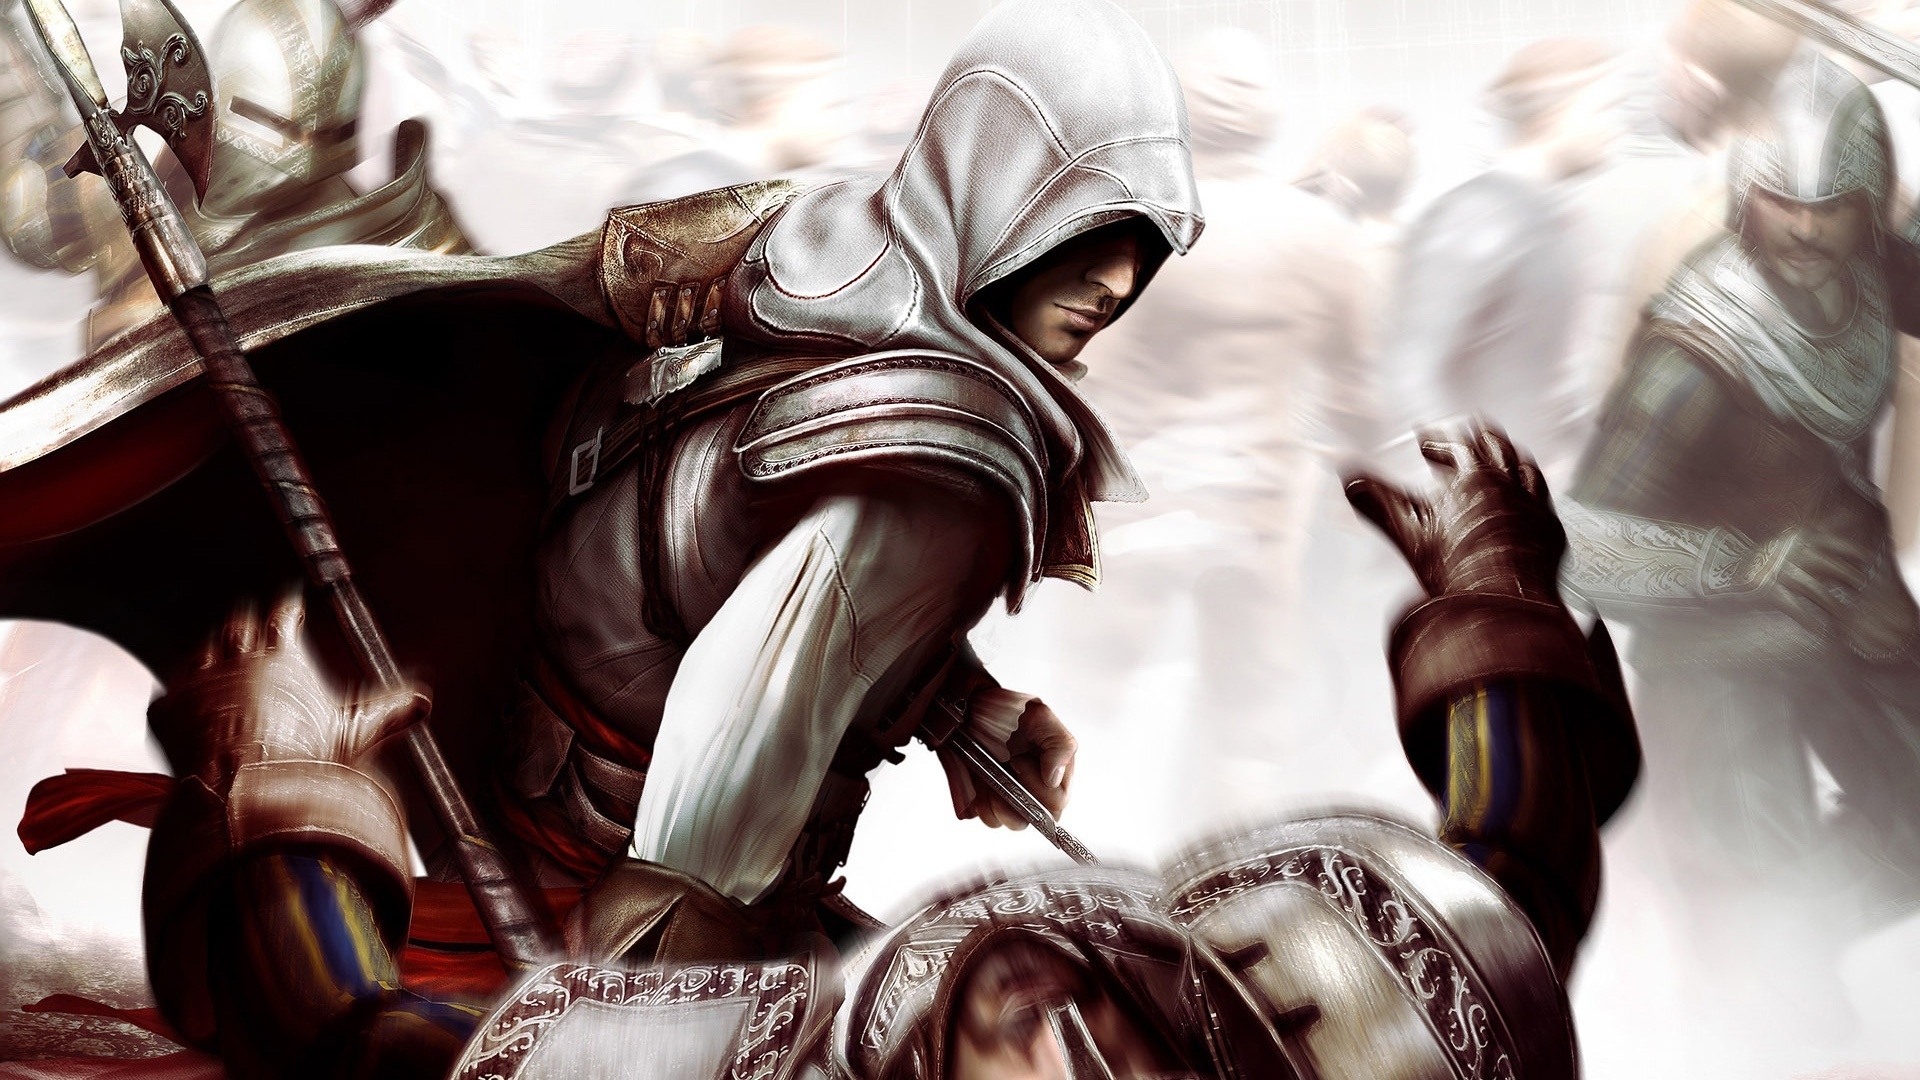 Assassin Creed Hit for 1920 x 1080 HDTV 1080p resolution